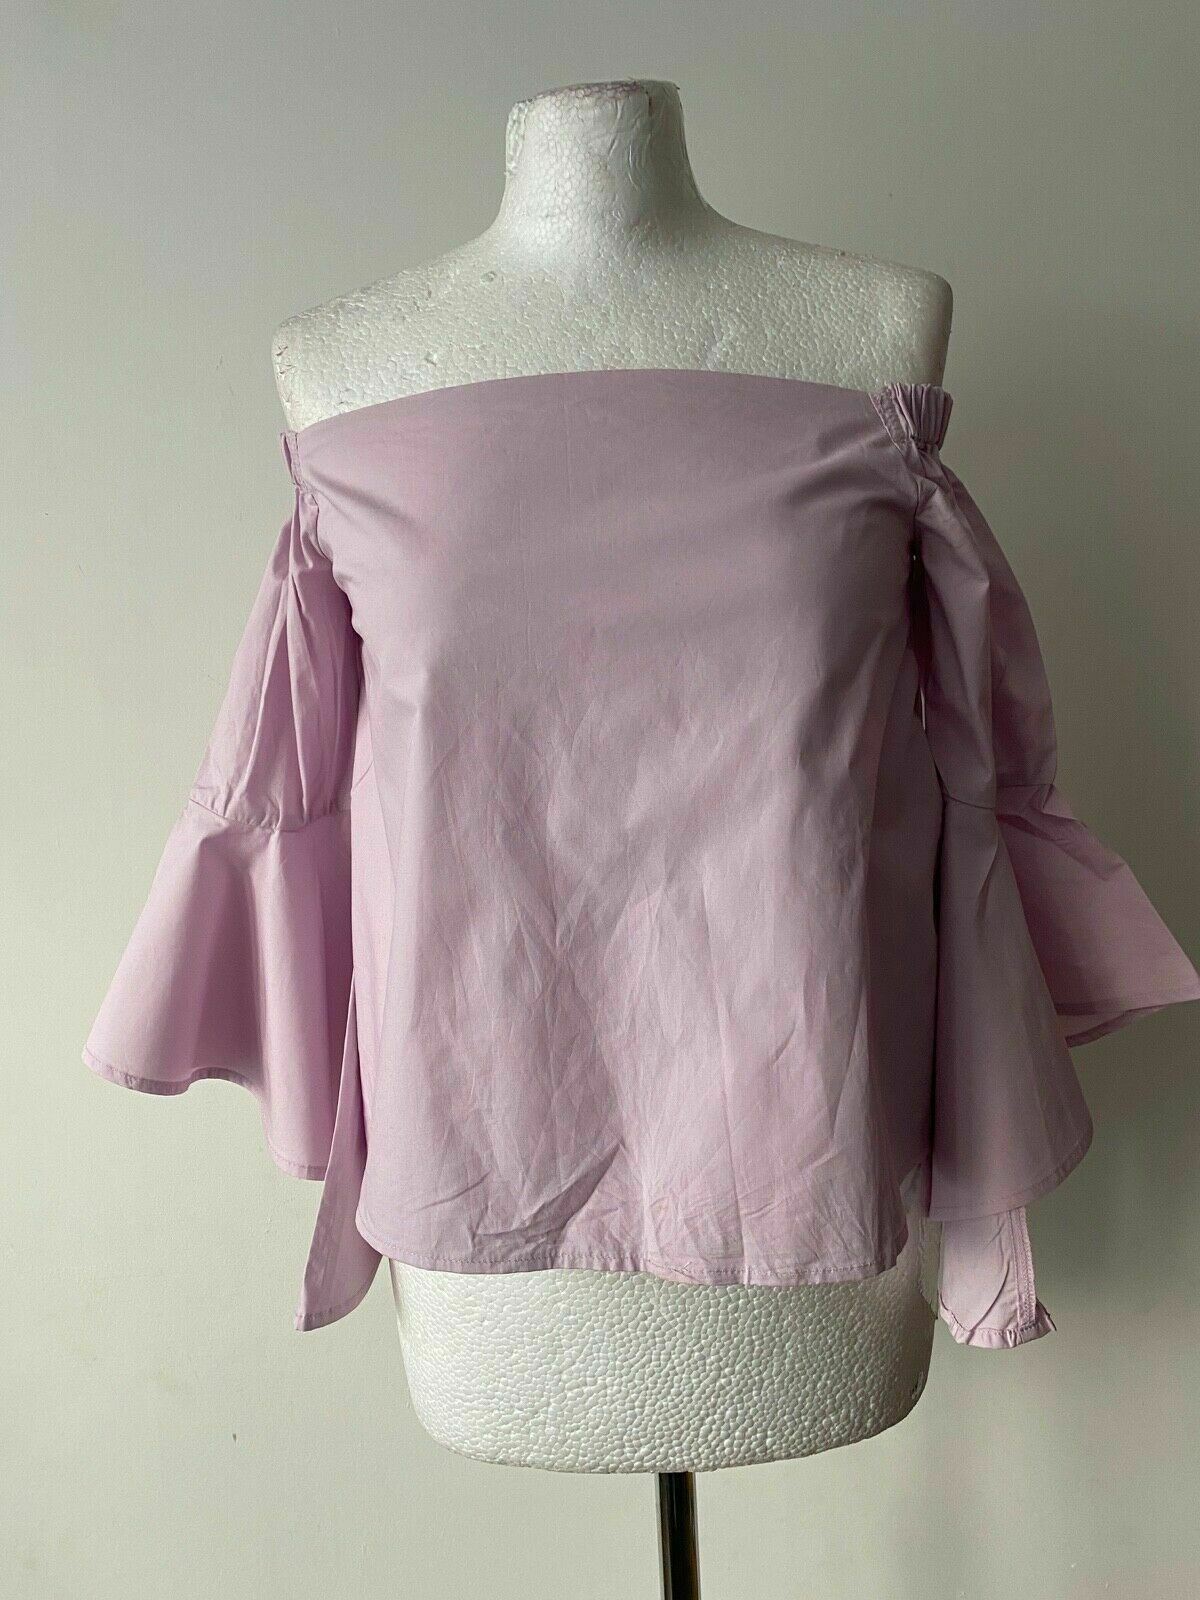 Glamorous Petite Pink Off the Shoulder Top Size 10 / 38 EUR